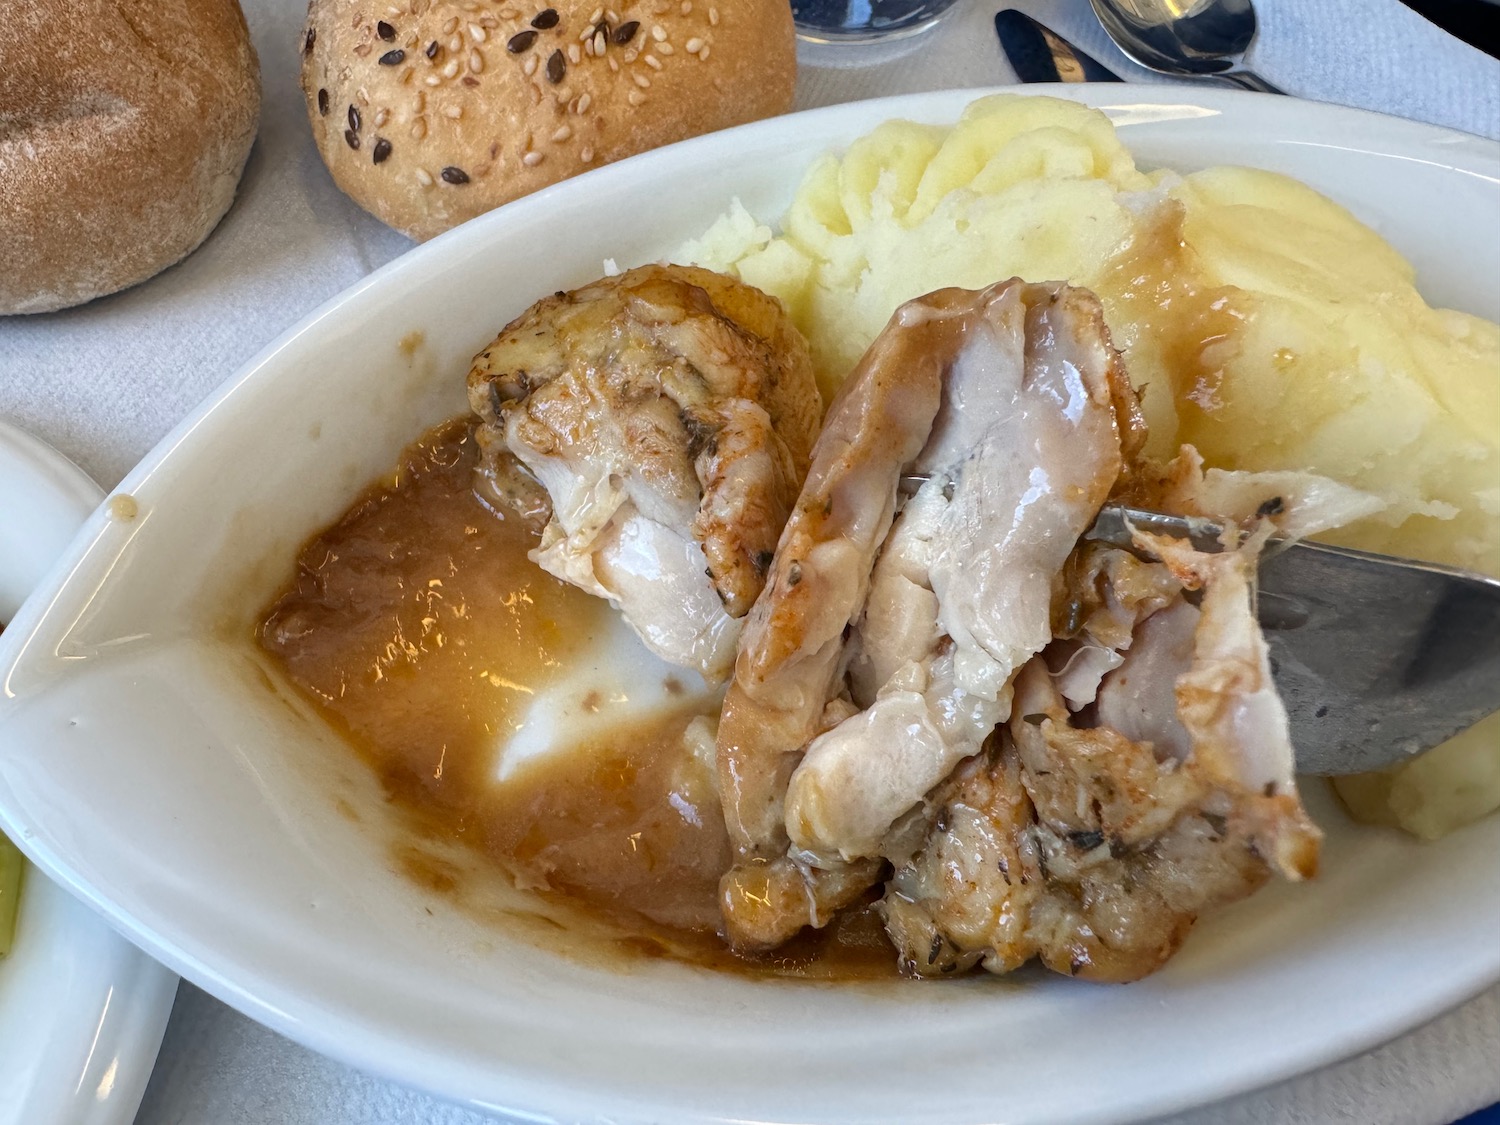 a plate of food with bread and spoons